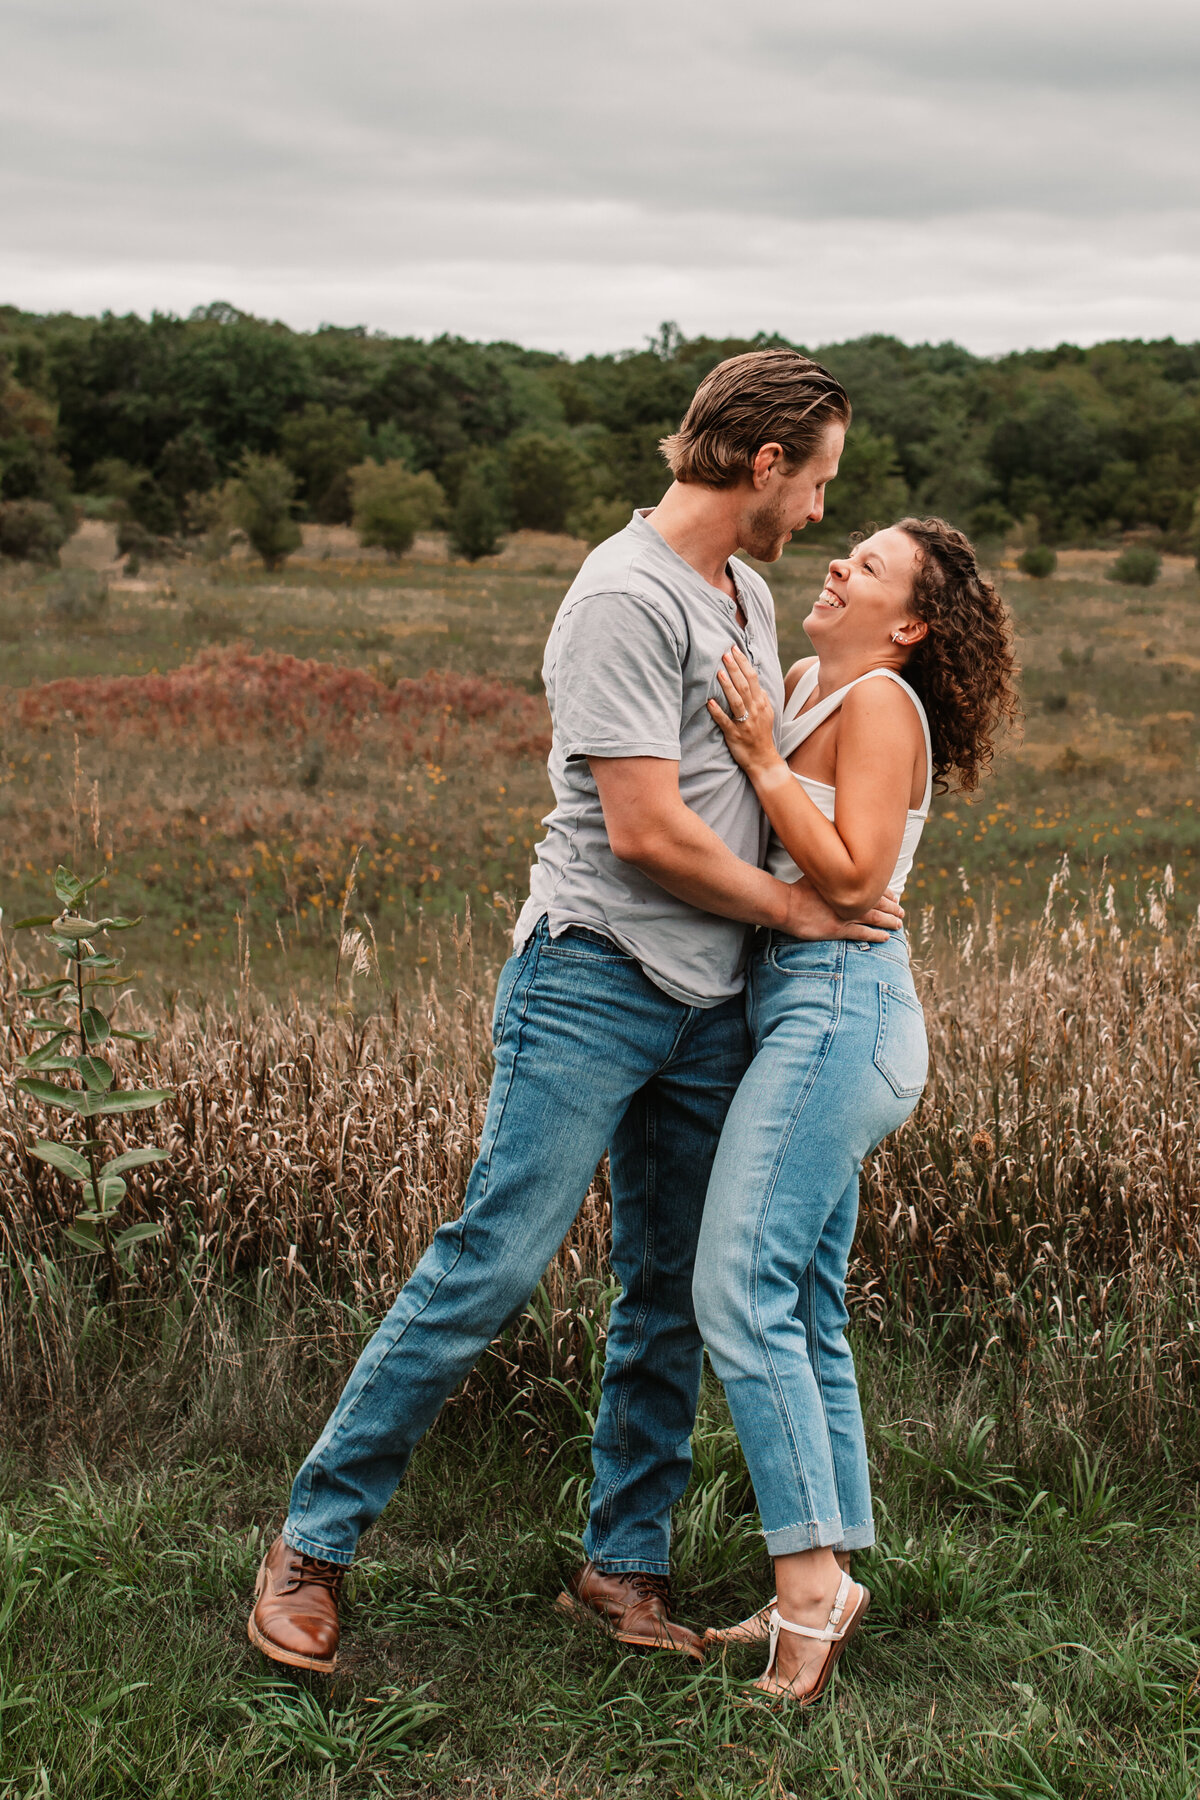 man and woman laugh together in a field wearing jeans